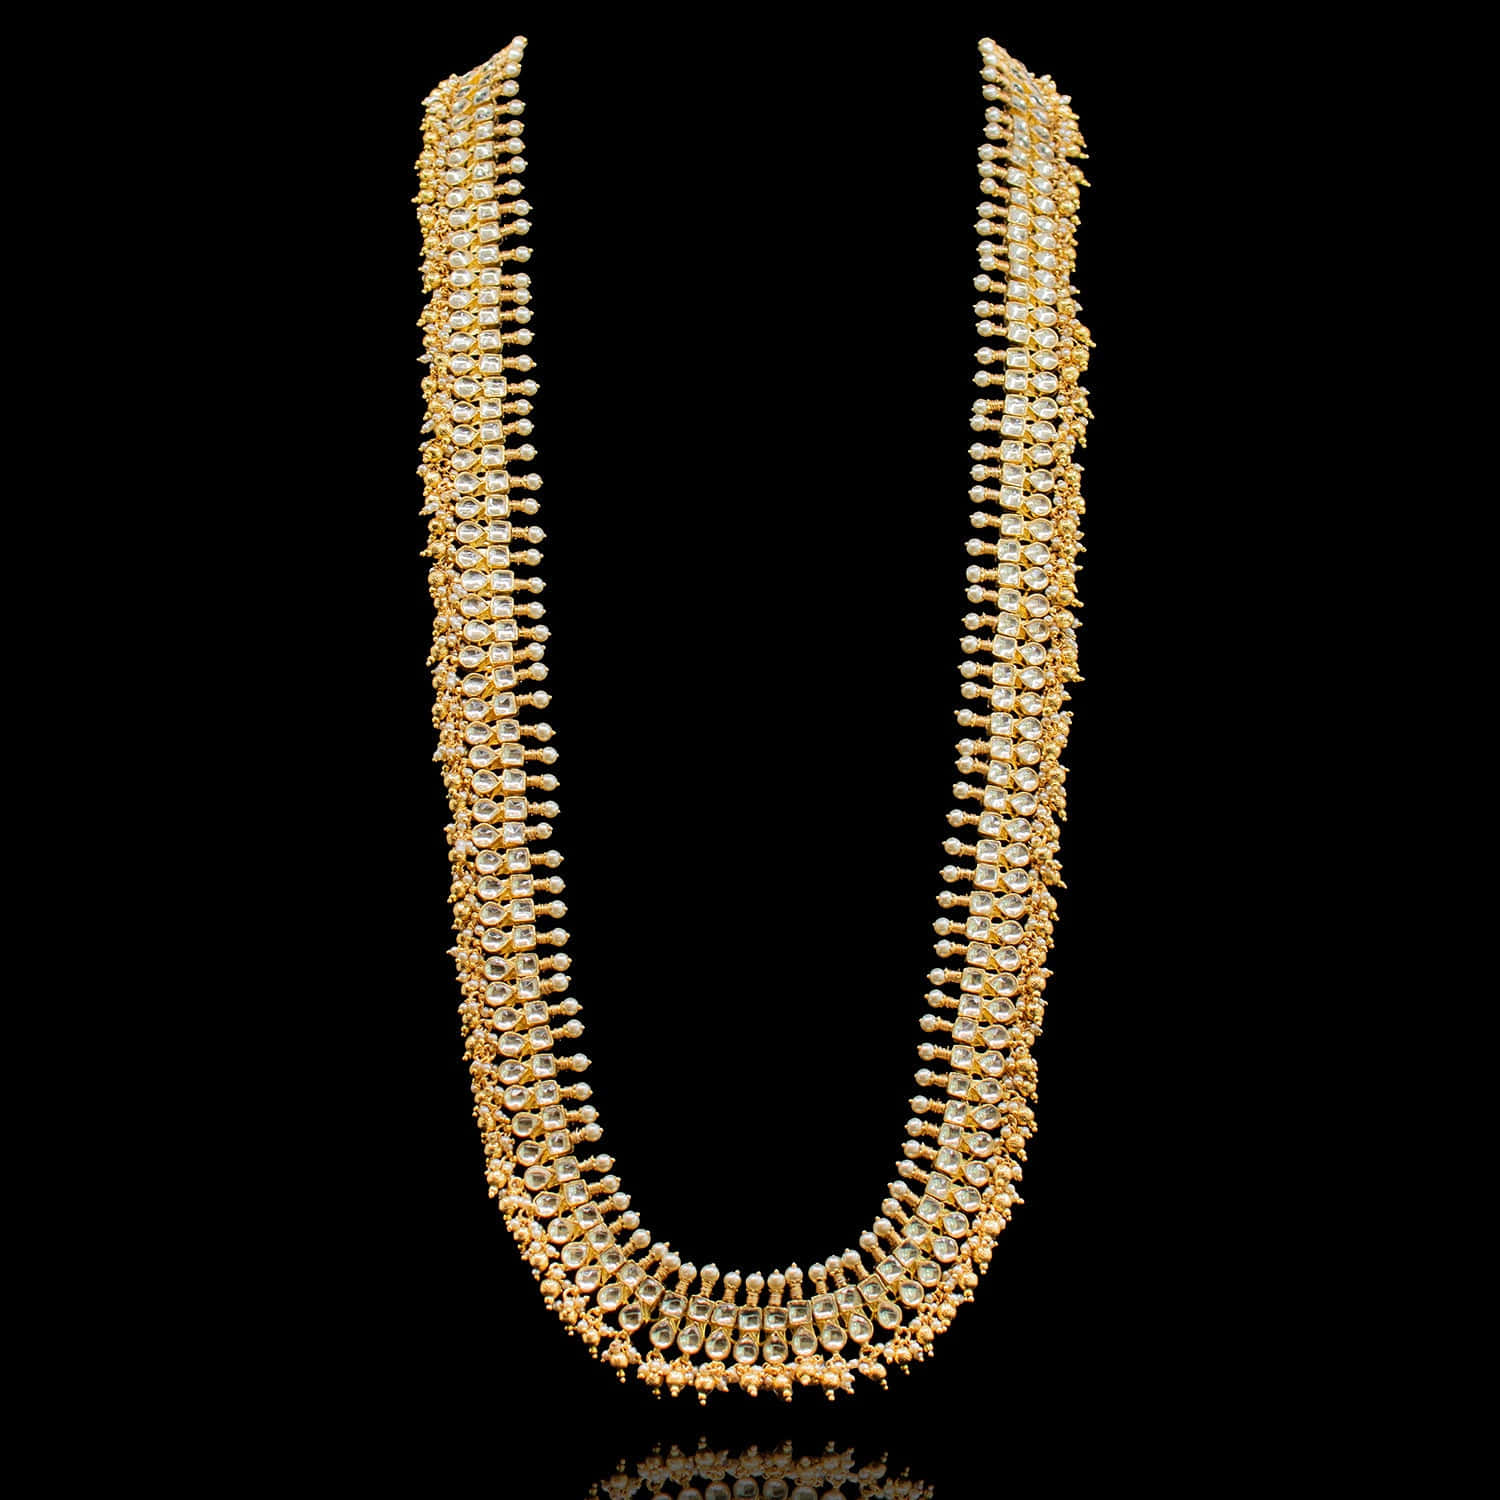 A Gold Necklace With Diamonds And Pearls Wallpaper